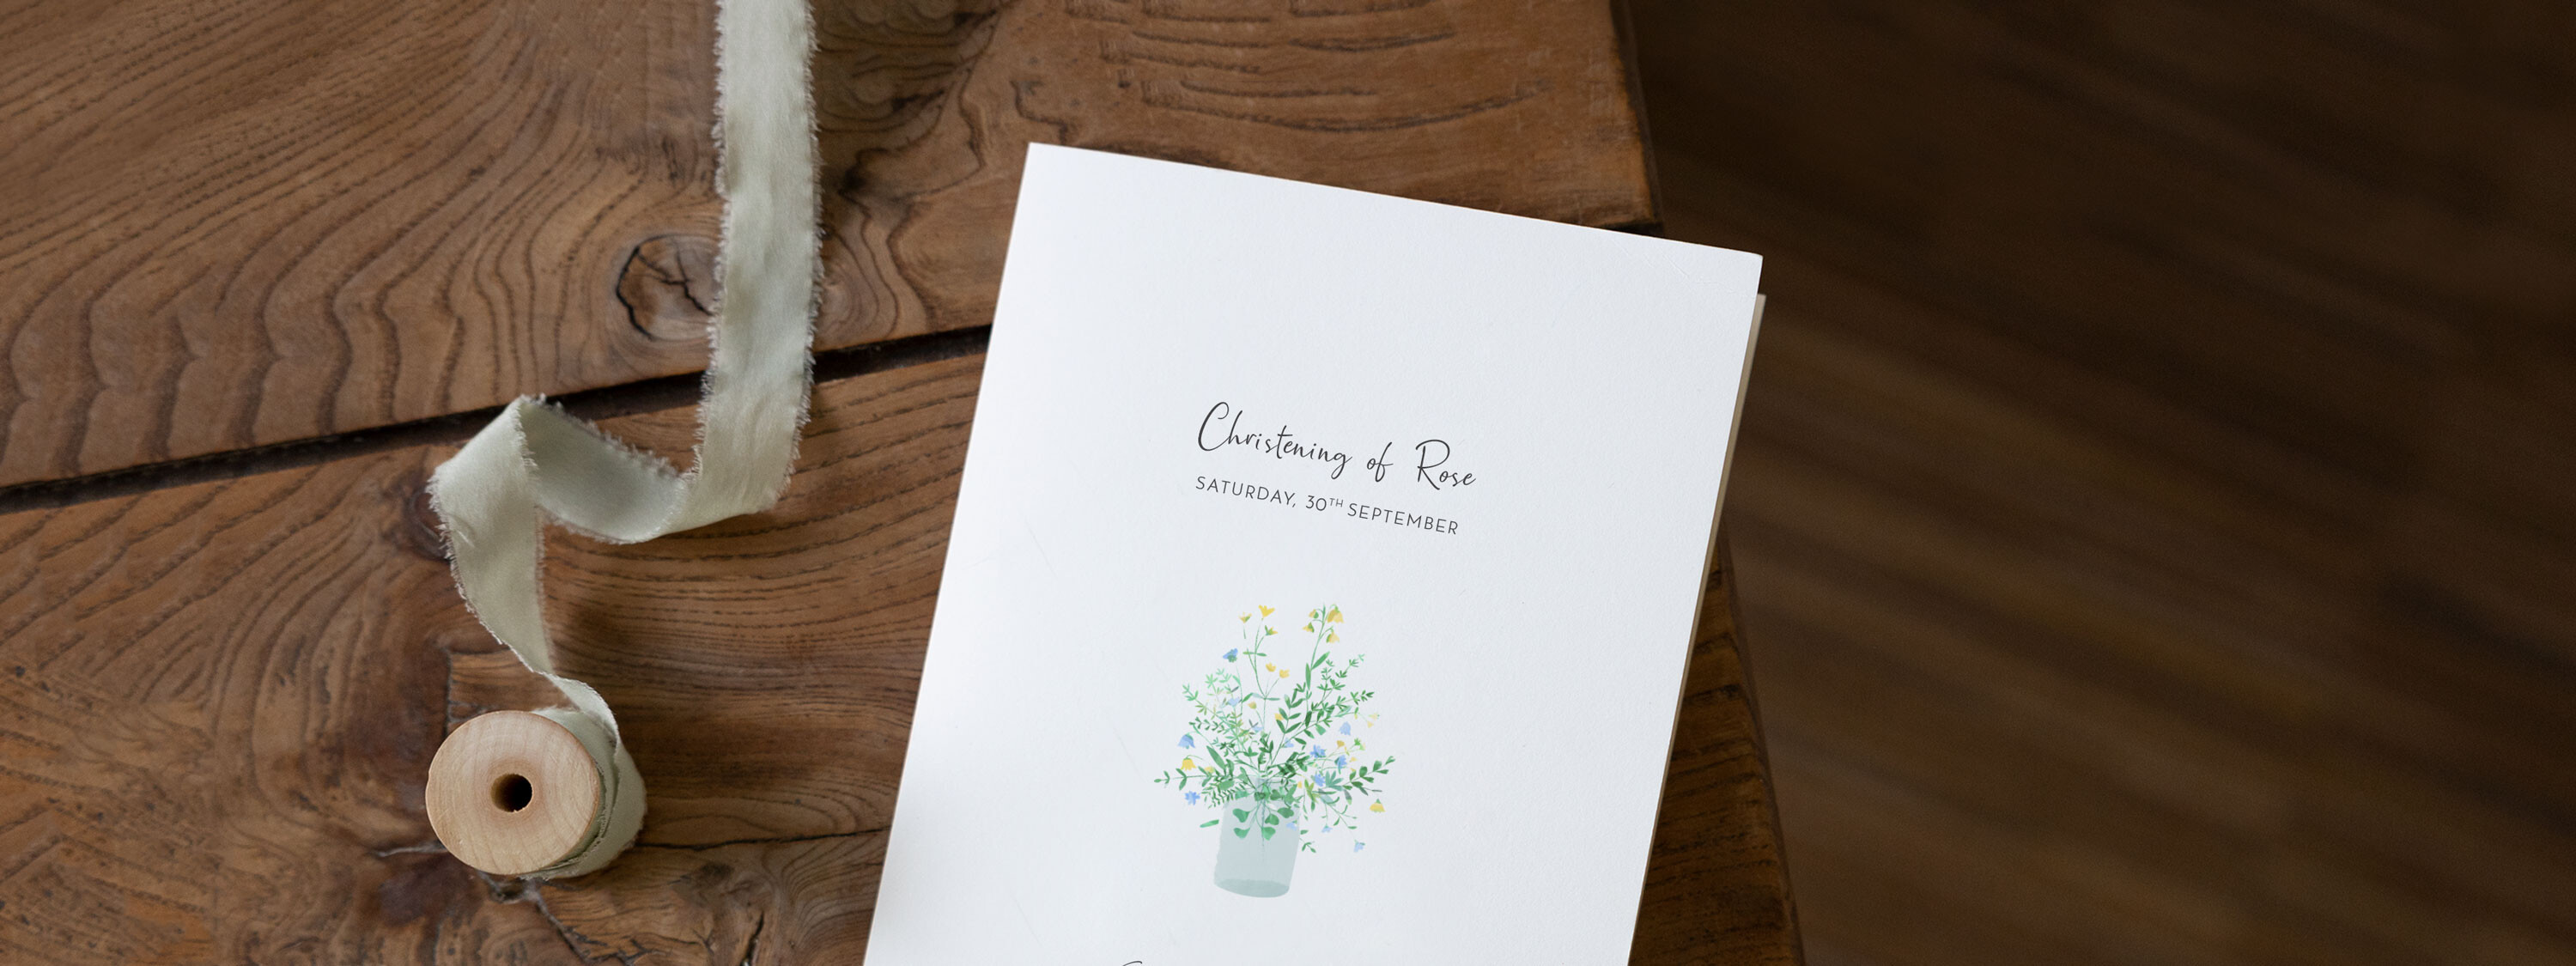 Christening Order of Service Booklets Cover 